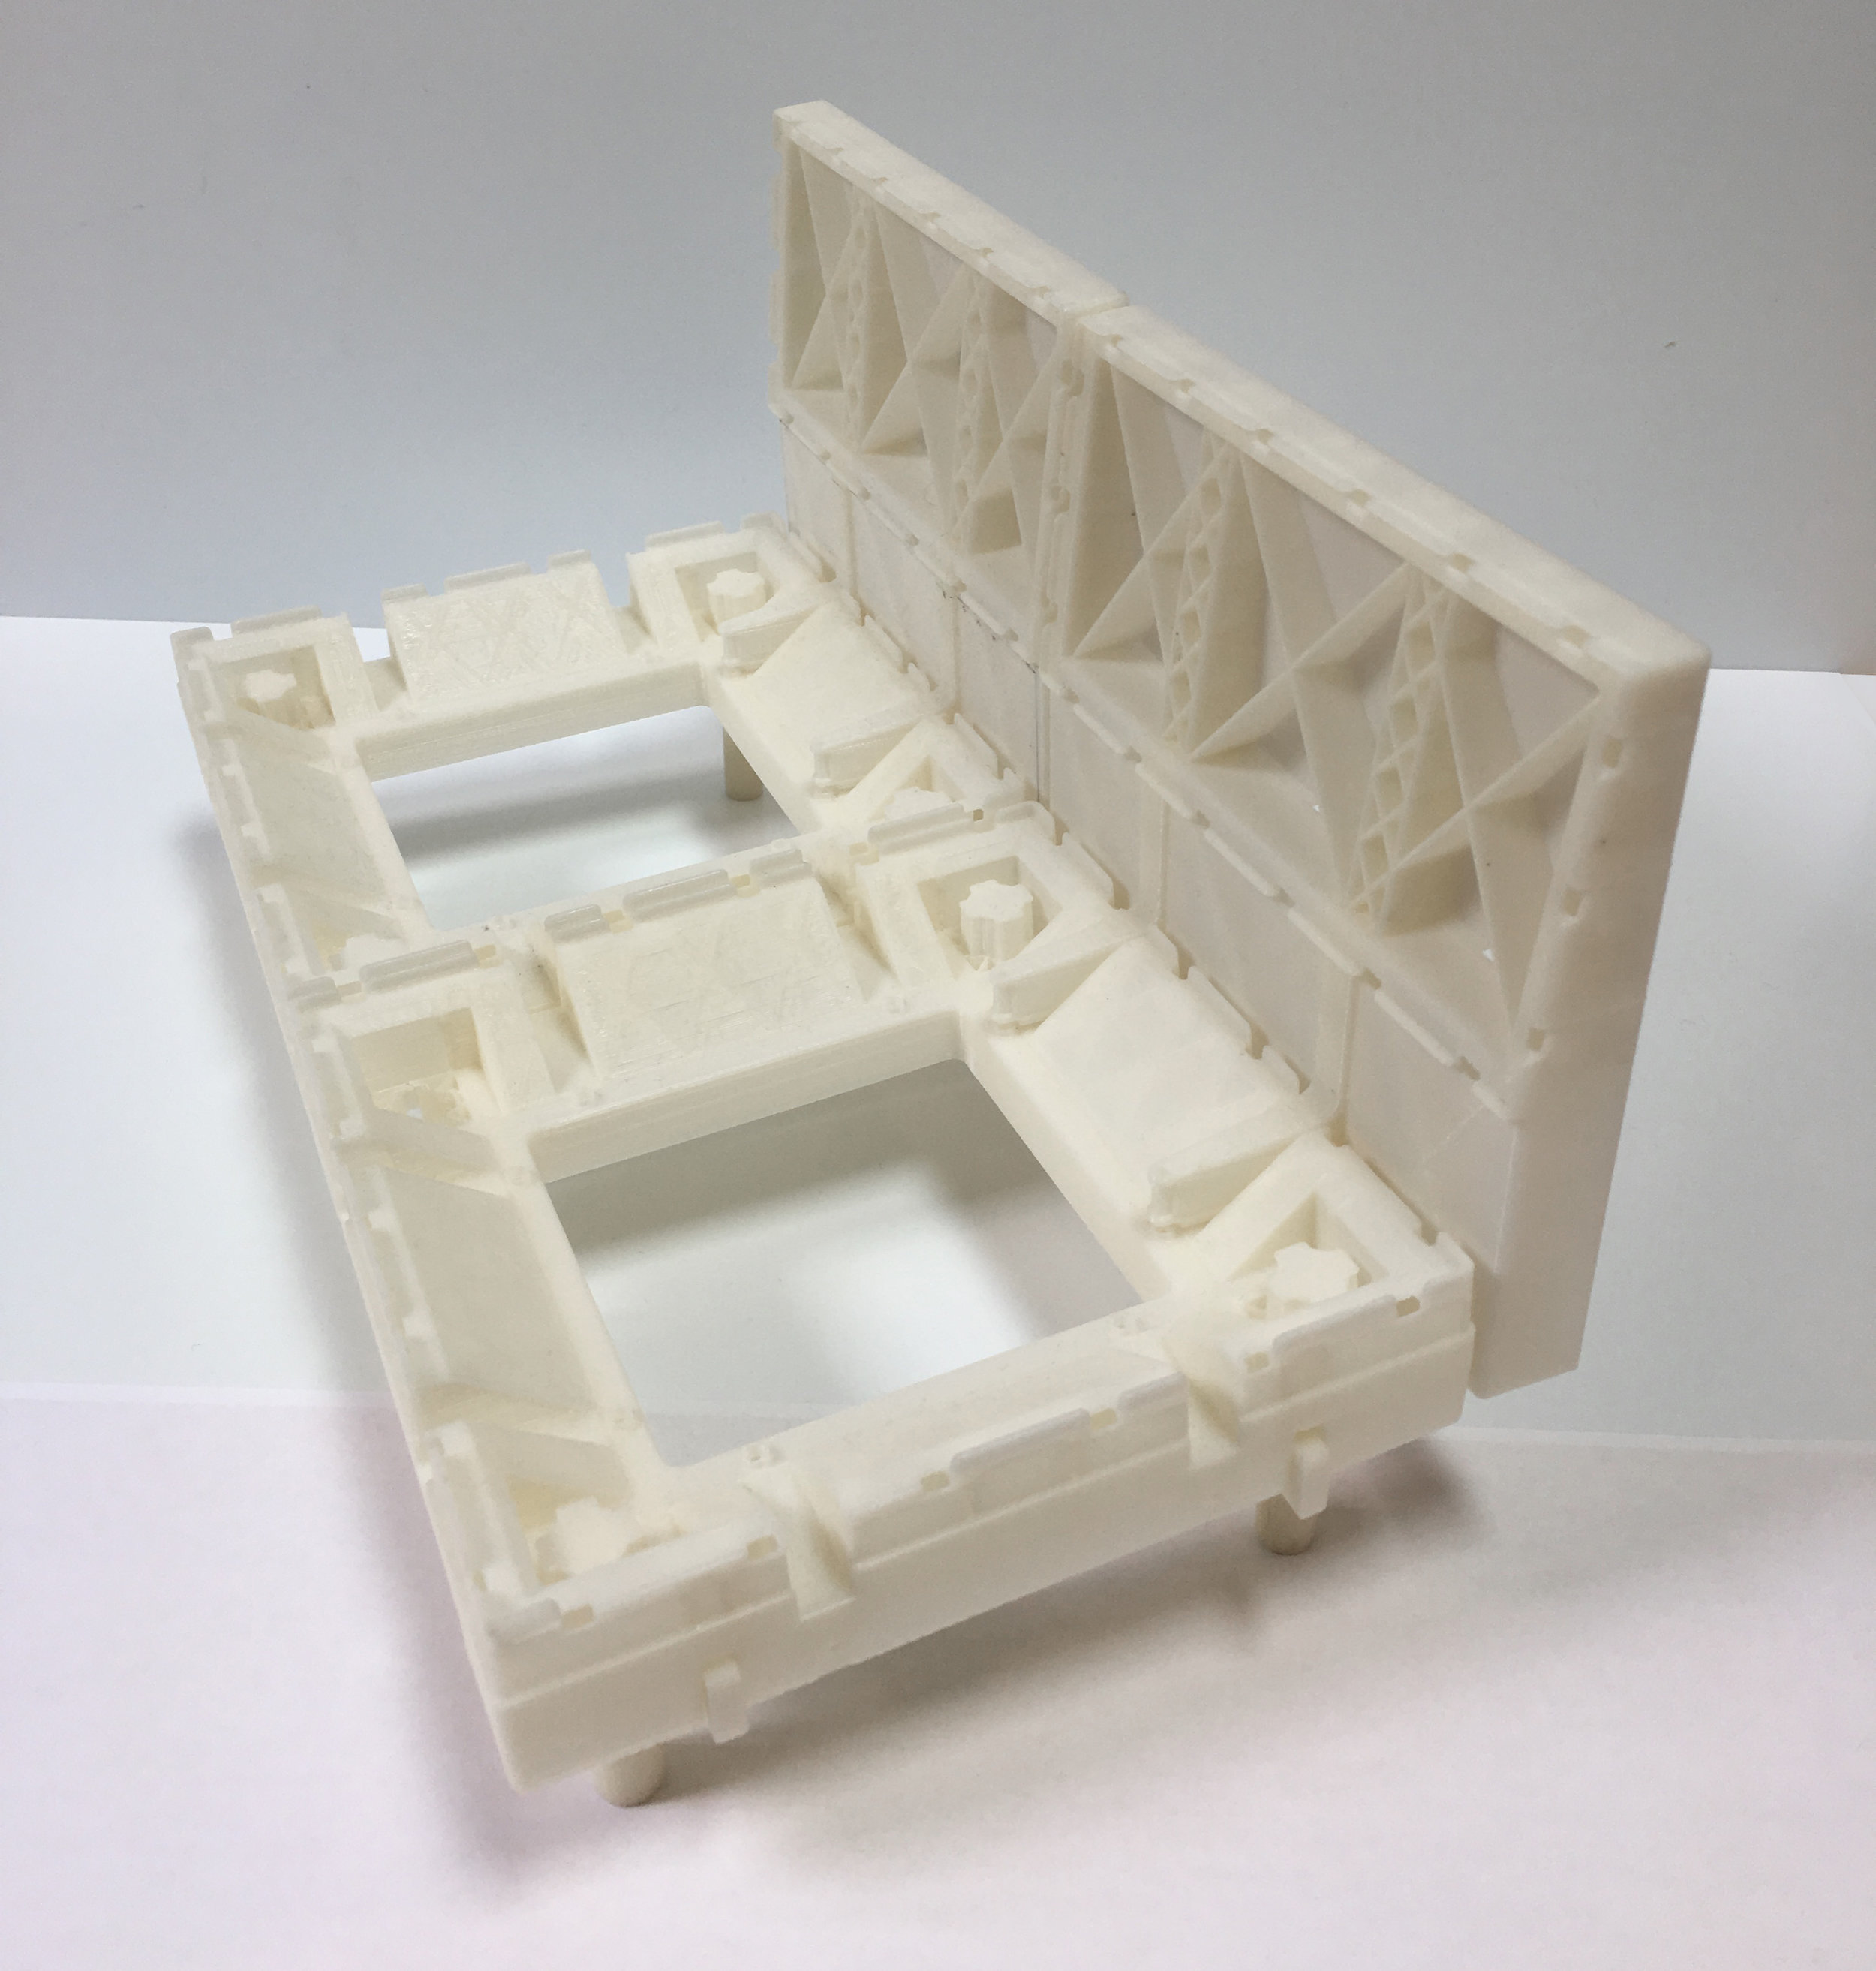  3D printed scale model of internal plastic components. 